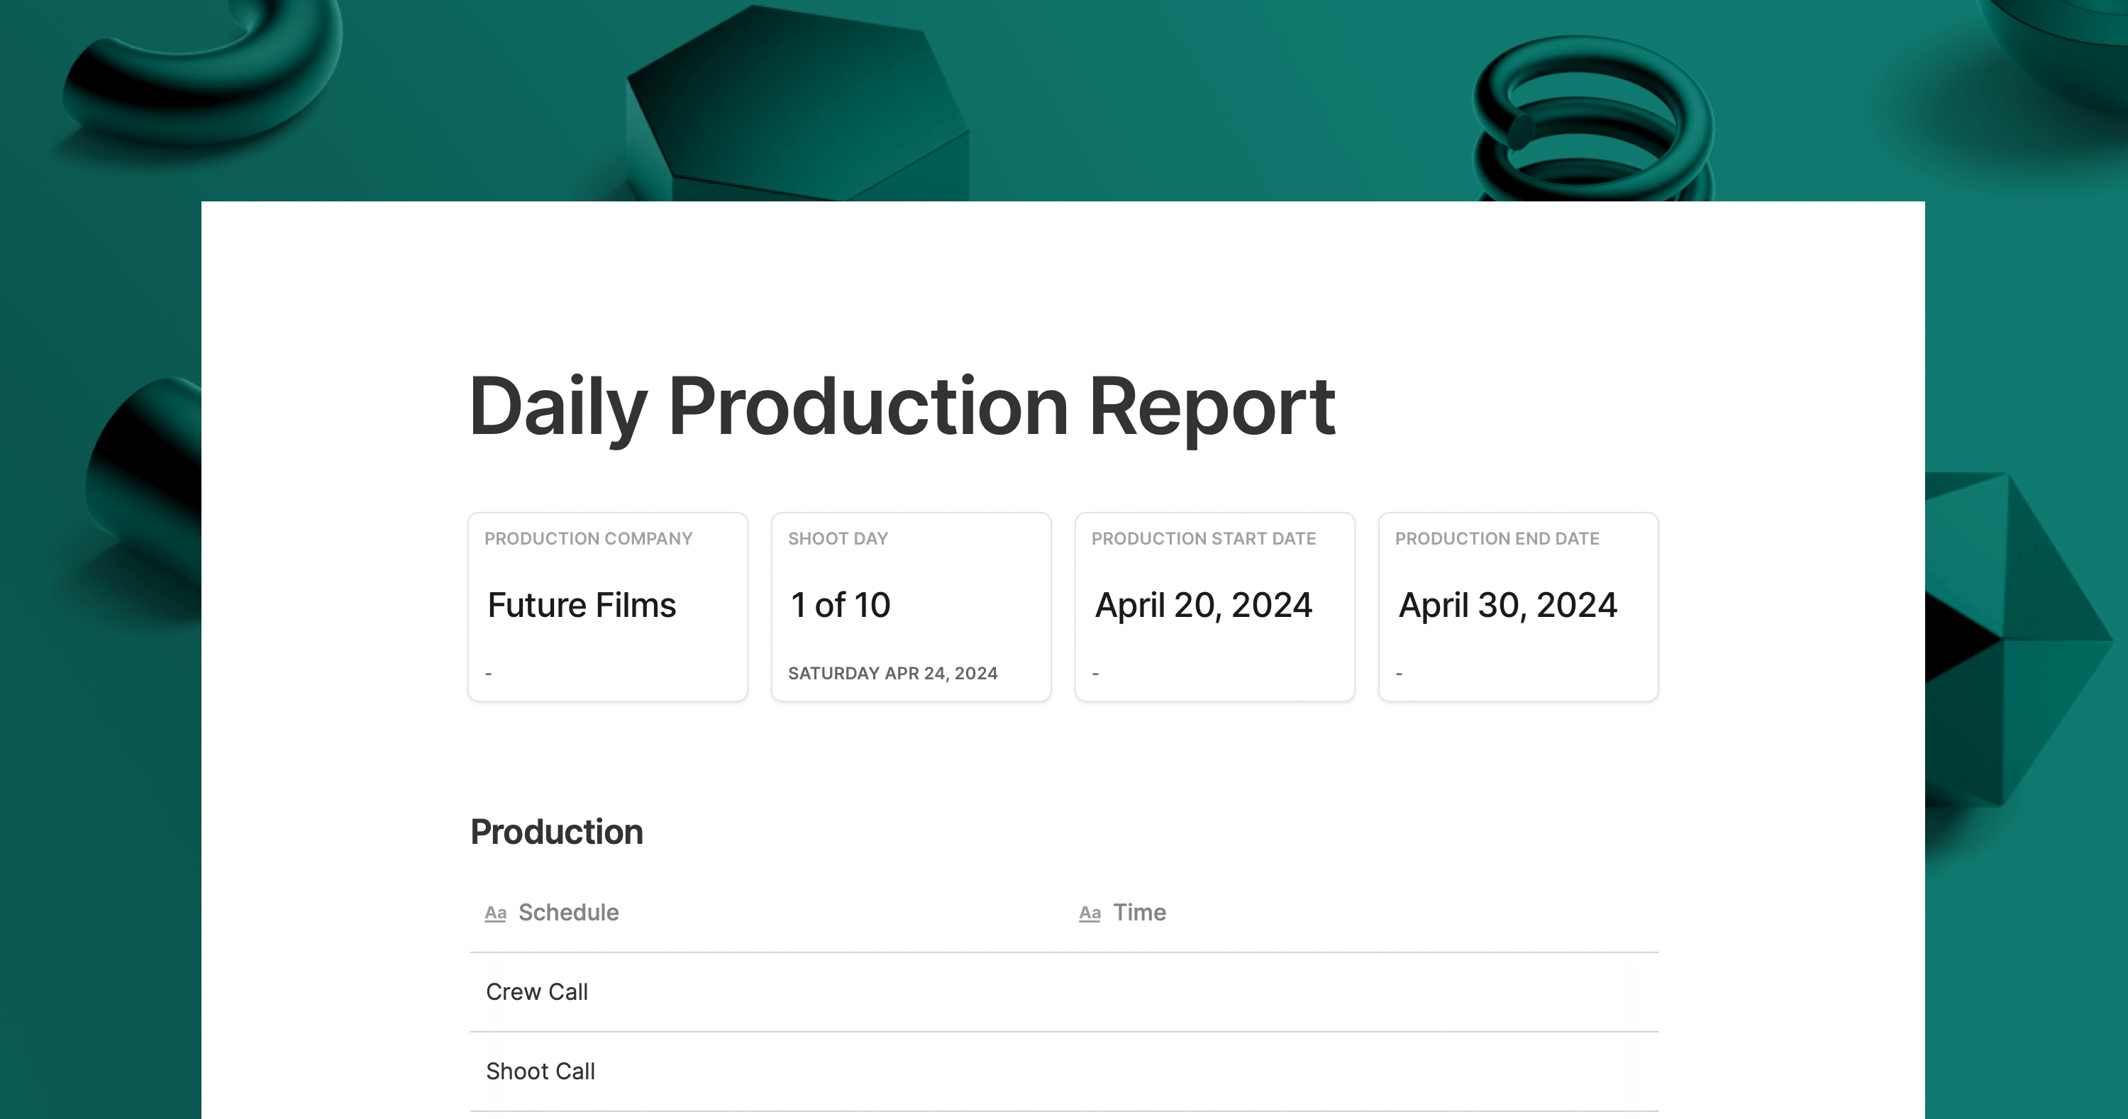 https://3389140.fs1.hubspotusercontent-na1.net/hubfs/3389140/daily%20production%20report%20cover-1.png